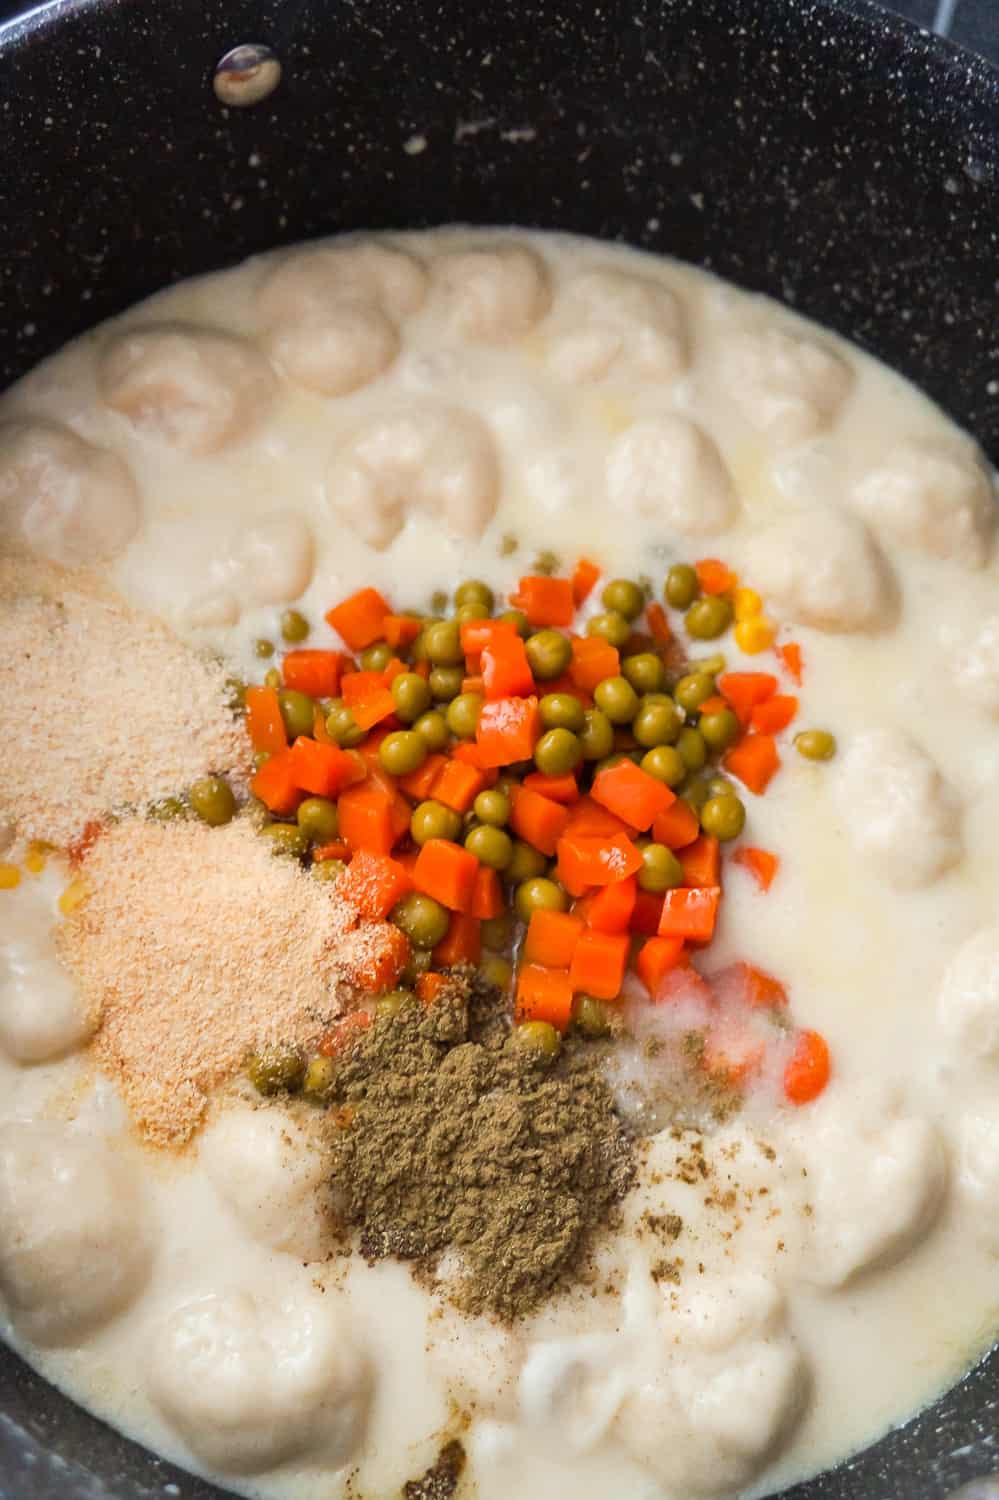 peas, carrots, salt, pepper and onion powder on top of cream chicken and dumplings